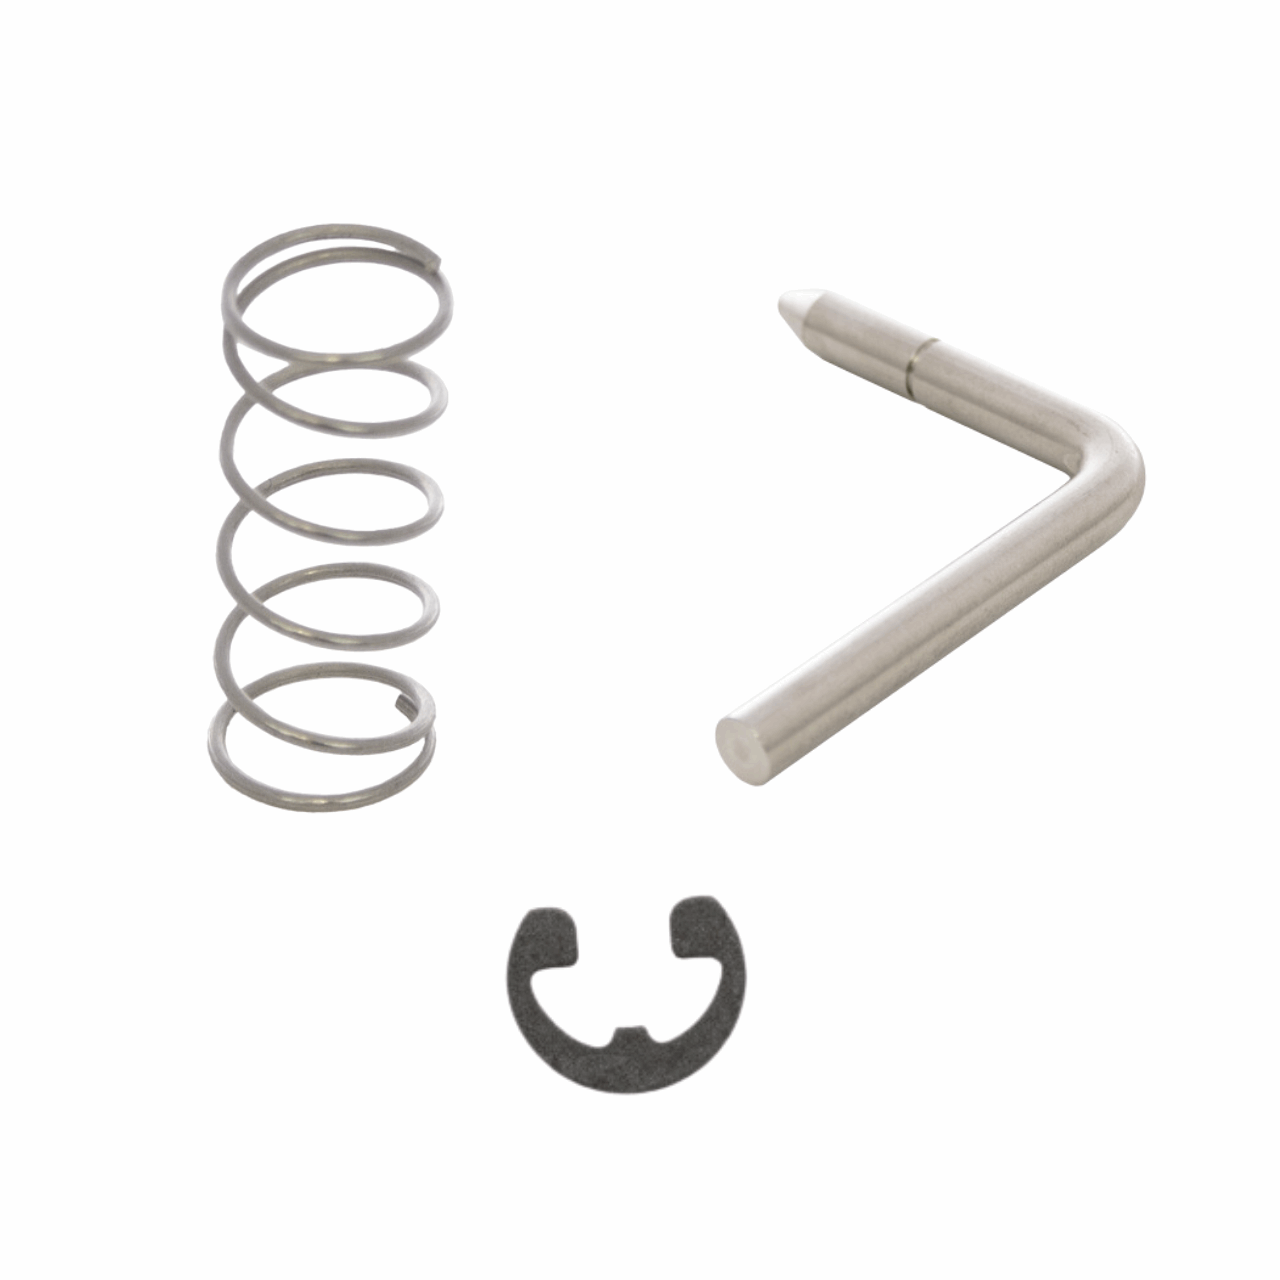 Carriage Lock Kit Fitting Hobart Saws 5701, 5801, 6614, 6801 Replaces 00-290795, 00-290787,RR-011-09